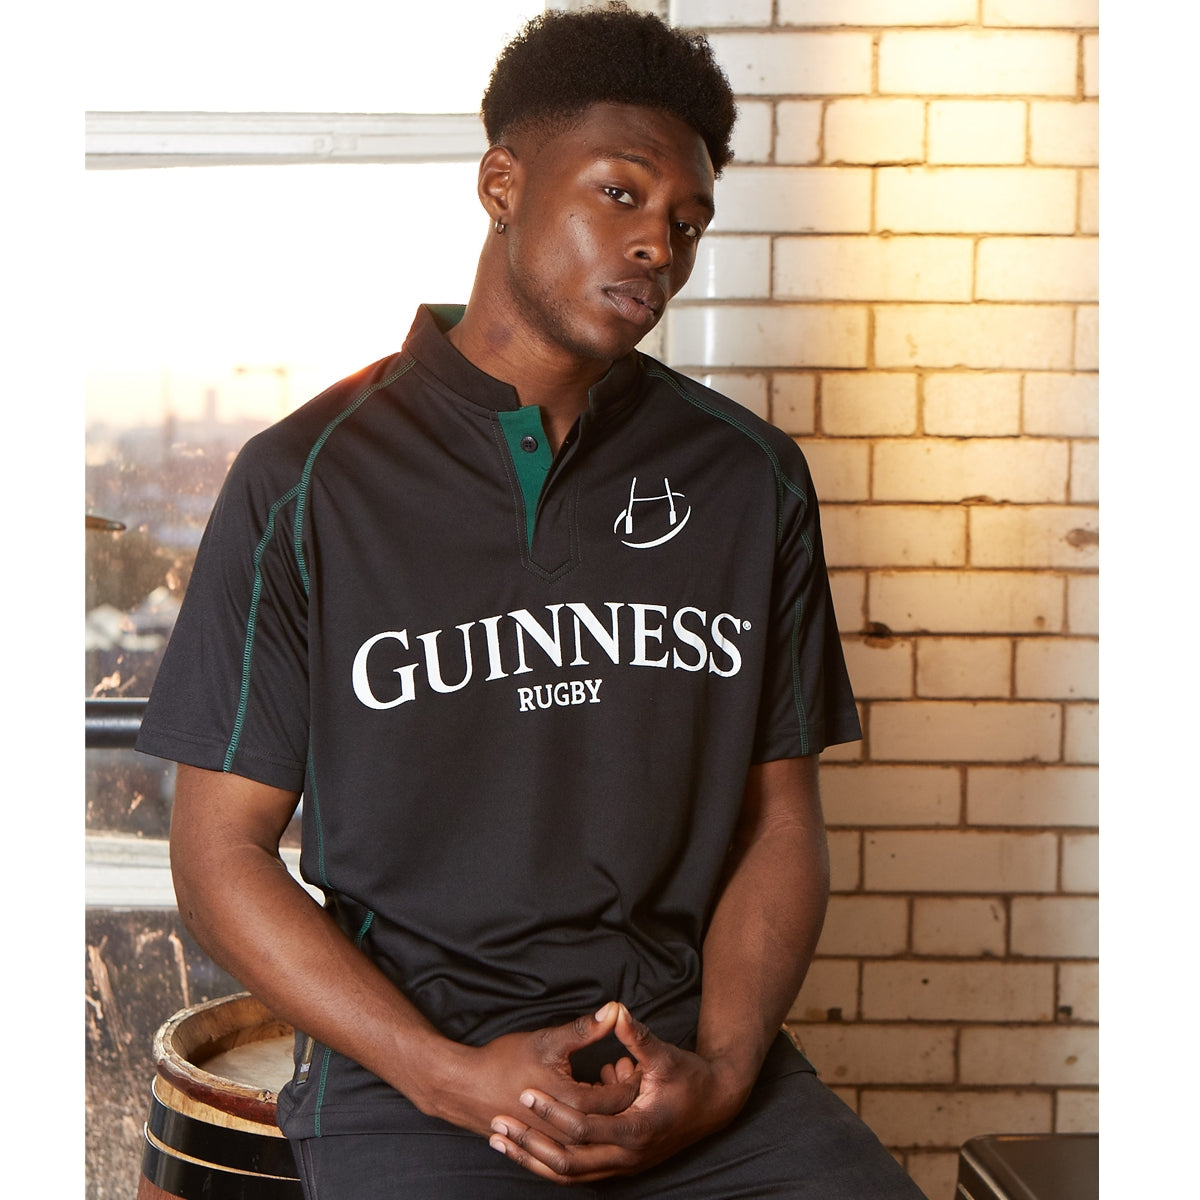 Guinness Black & Green Short Sleeve Rugby Jersey in Ireland.